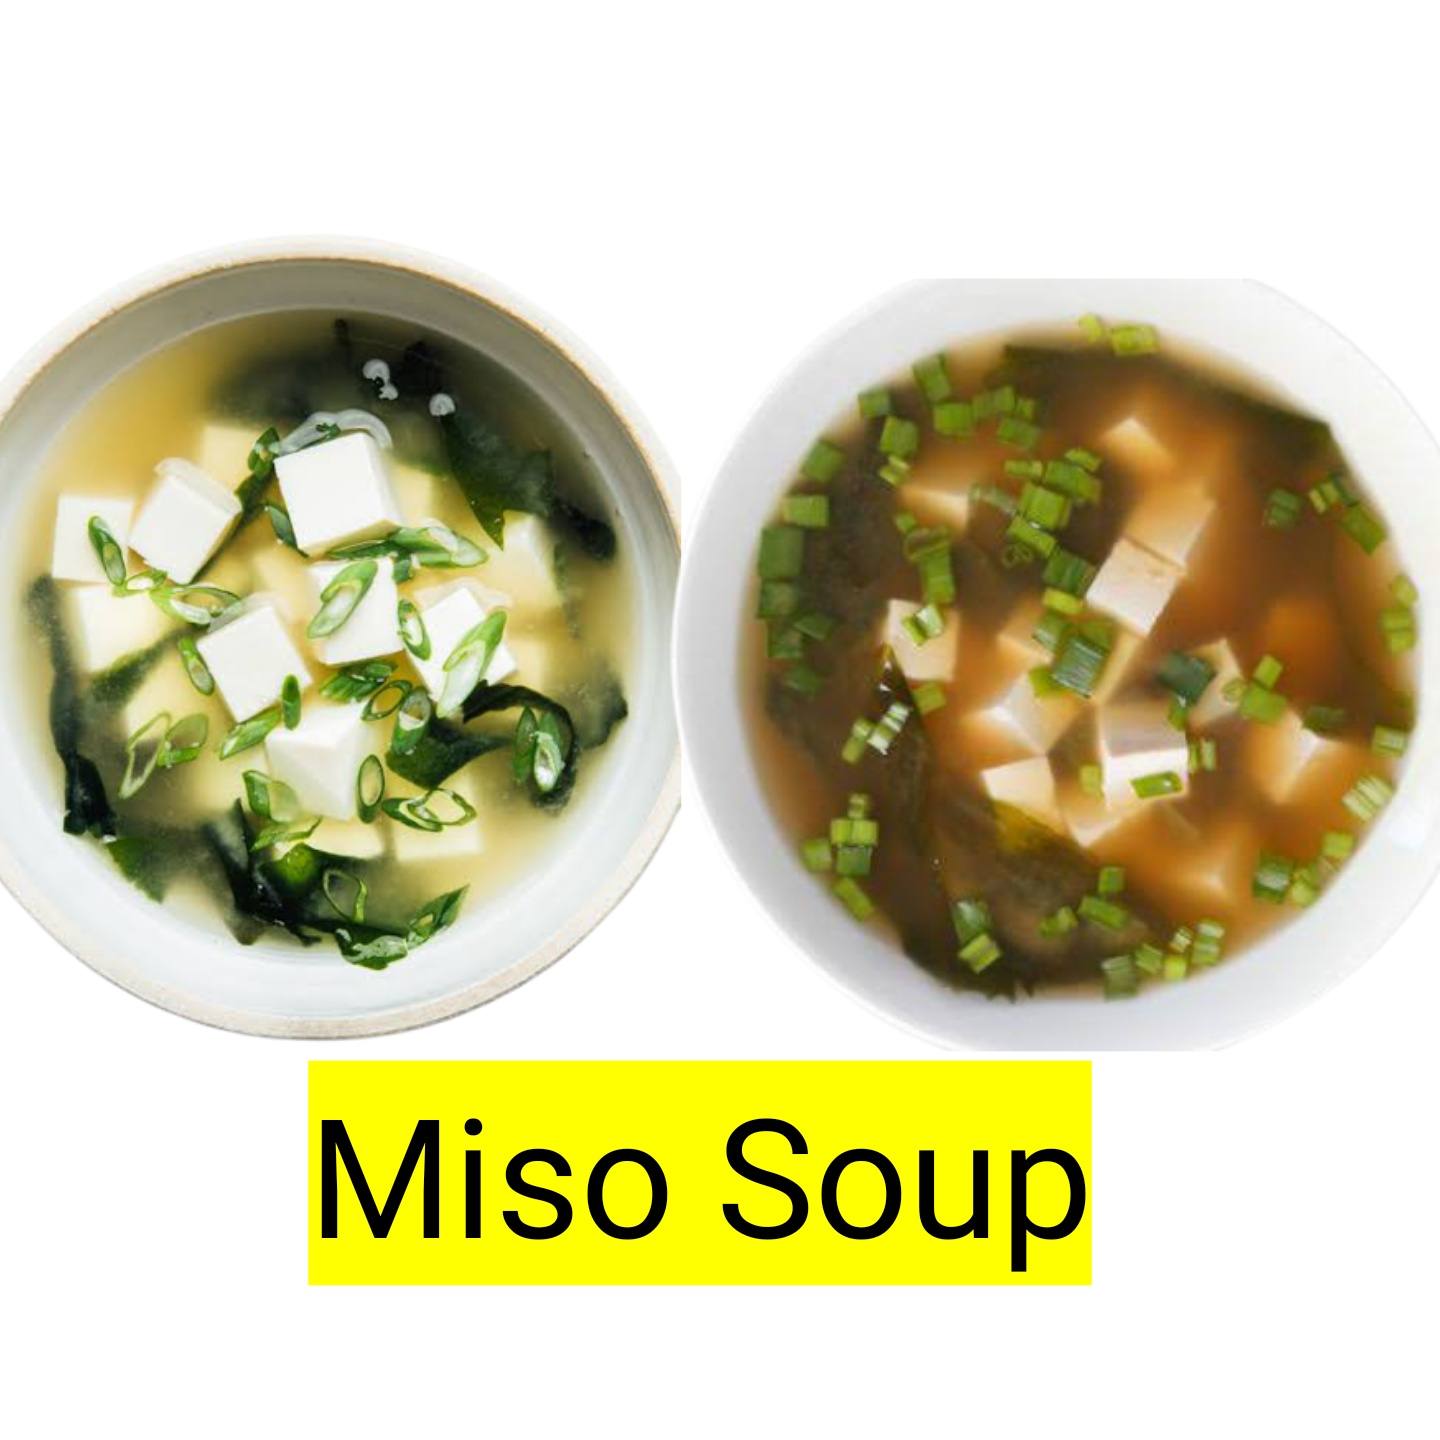 Miso Soup meal